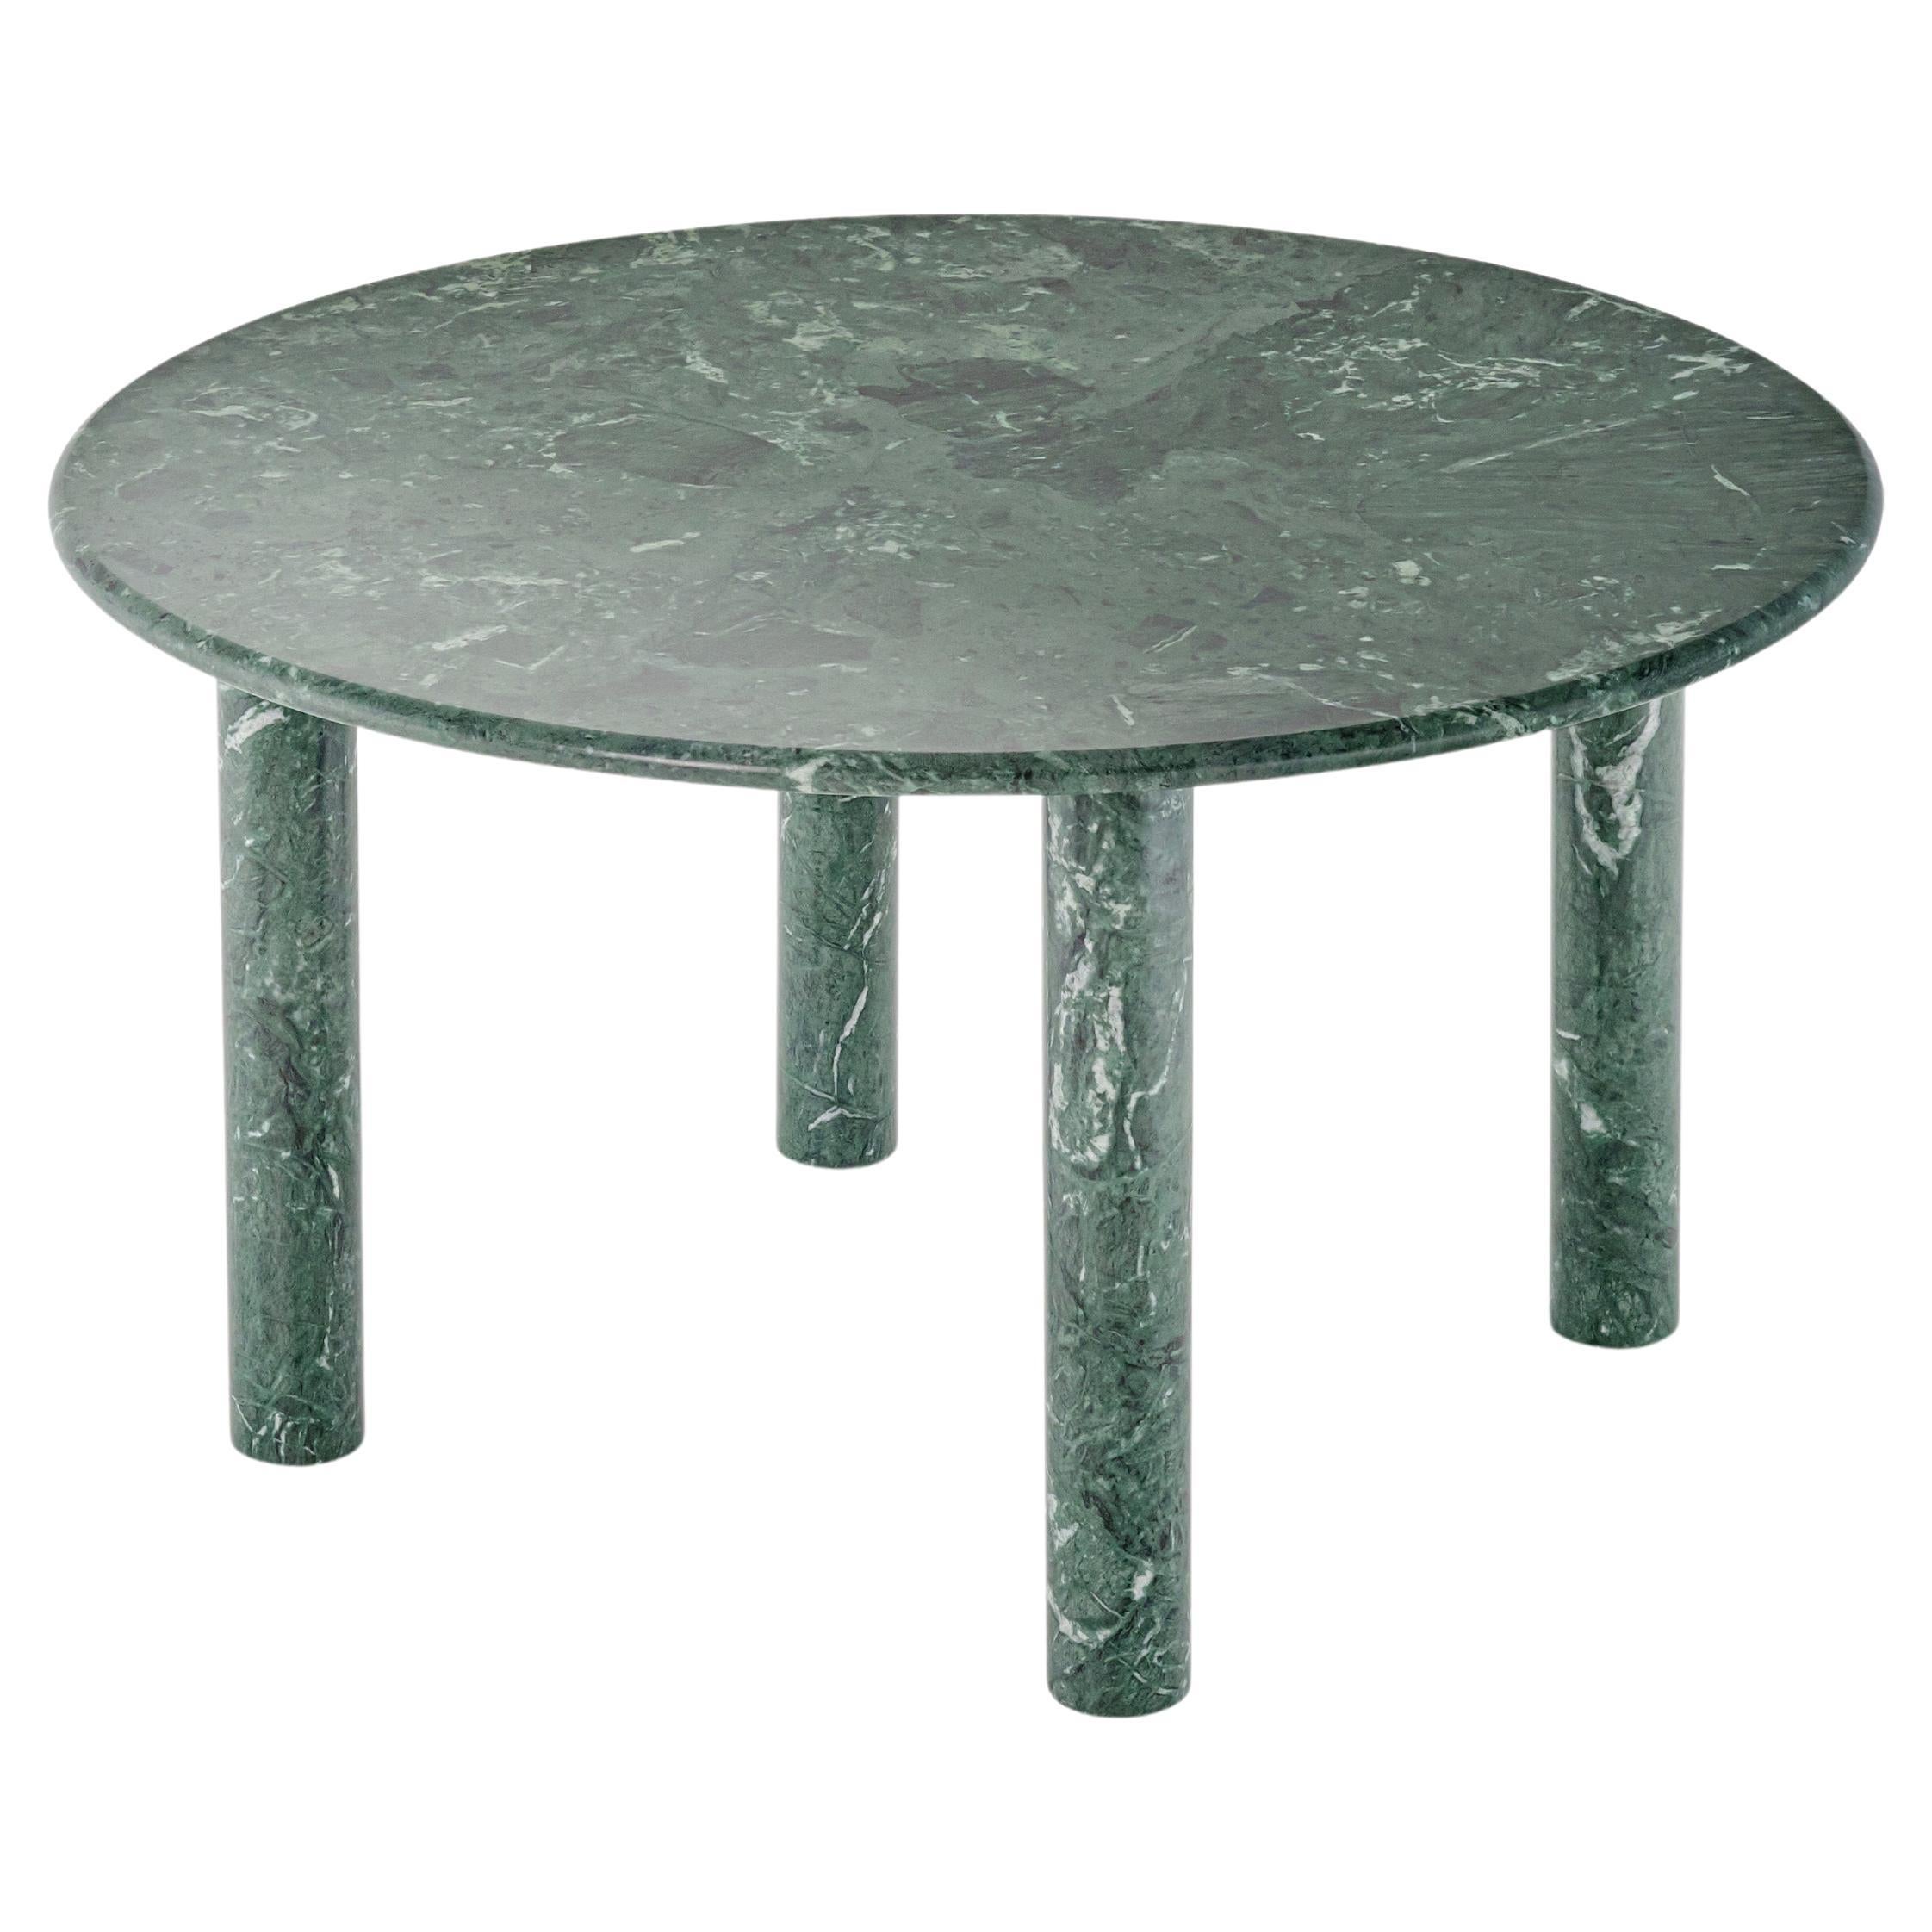 Modern Dining Round Table 'Paul' by Noom, Green Marble